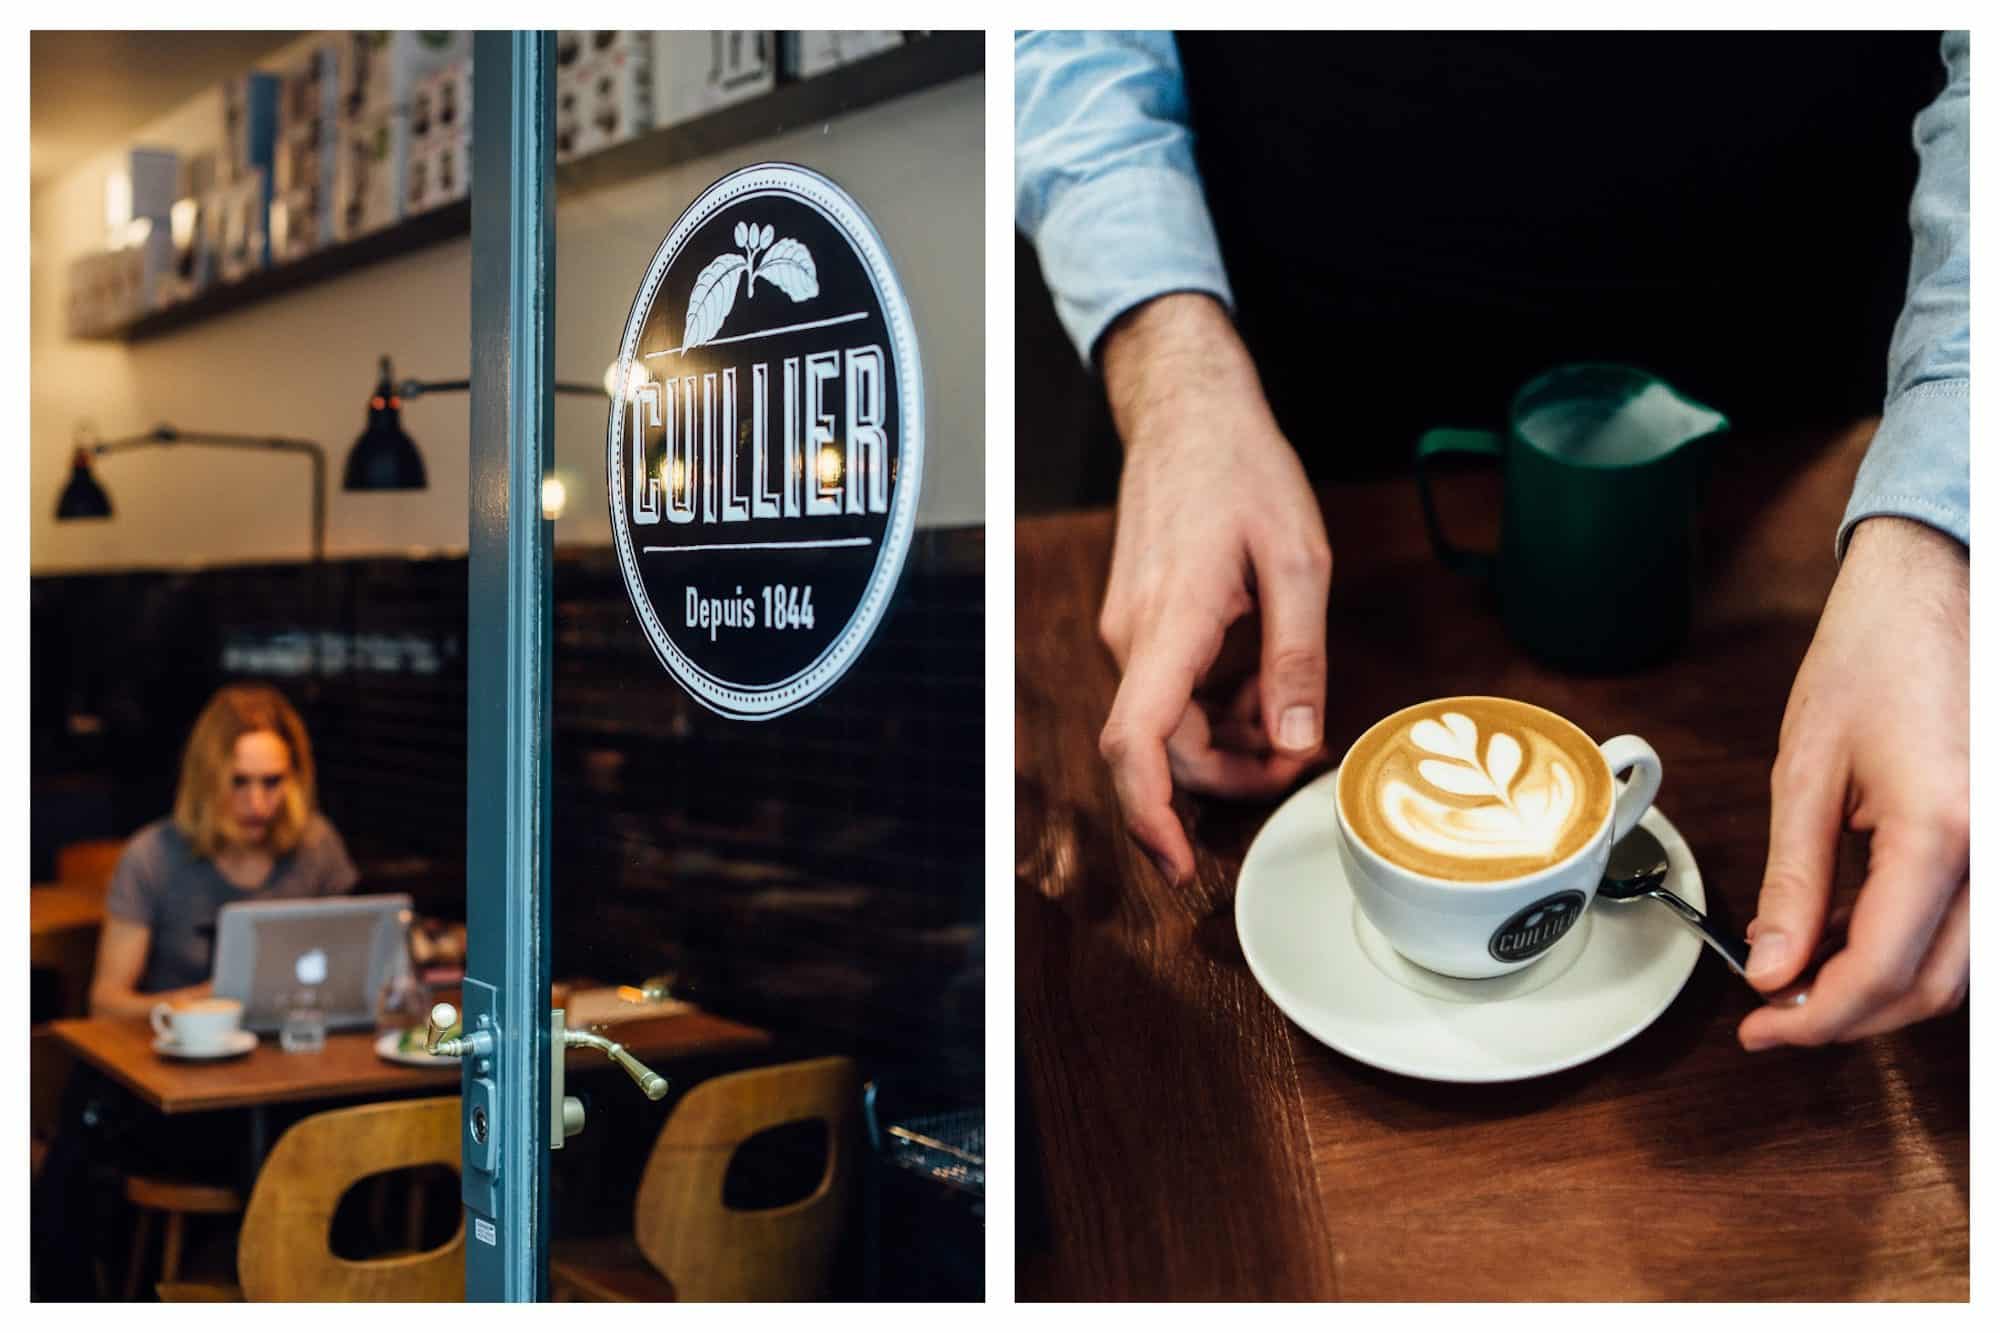 A freshly made cappuccino between the hands of the barista at Cuillier coffee shop in St Germain des Près Paris